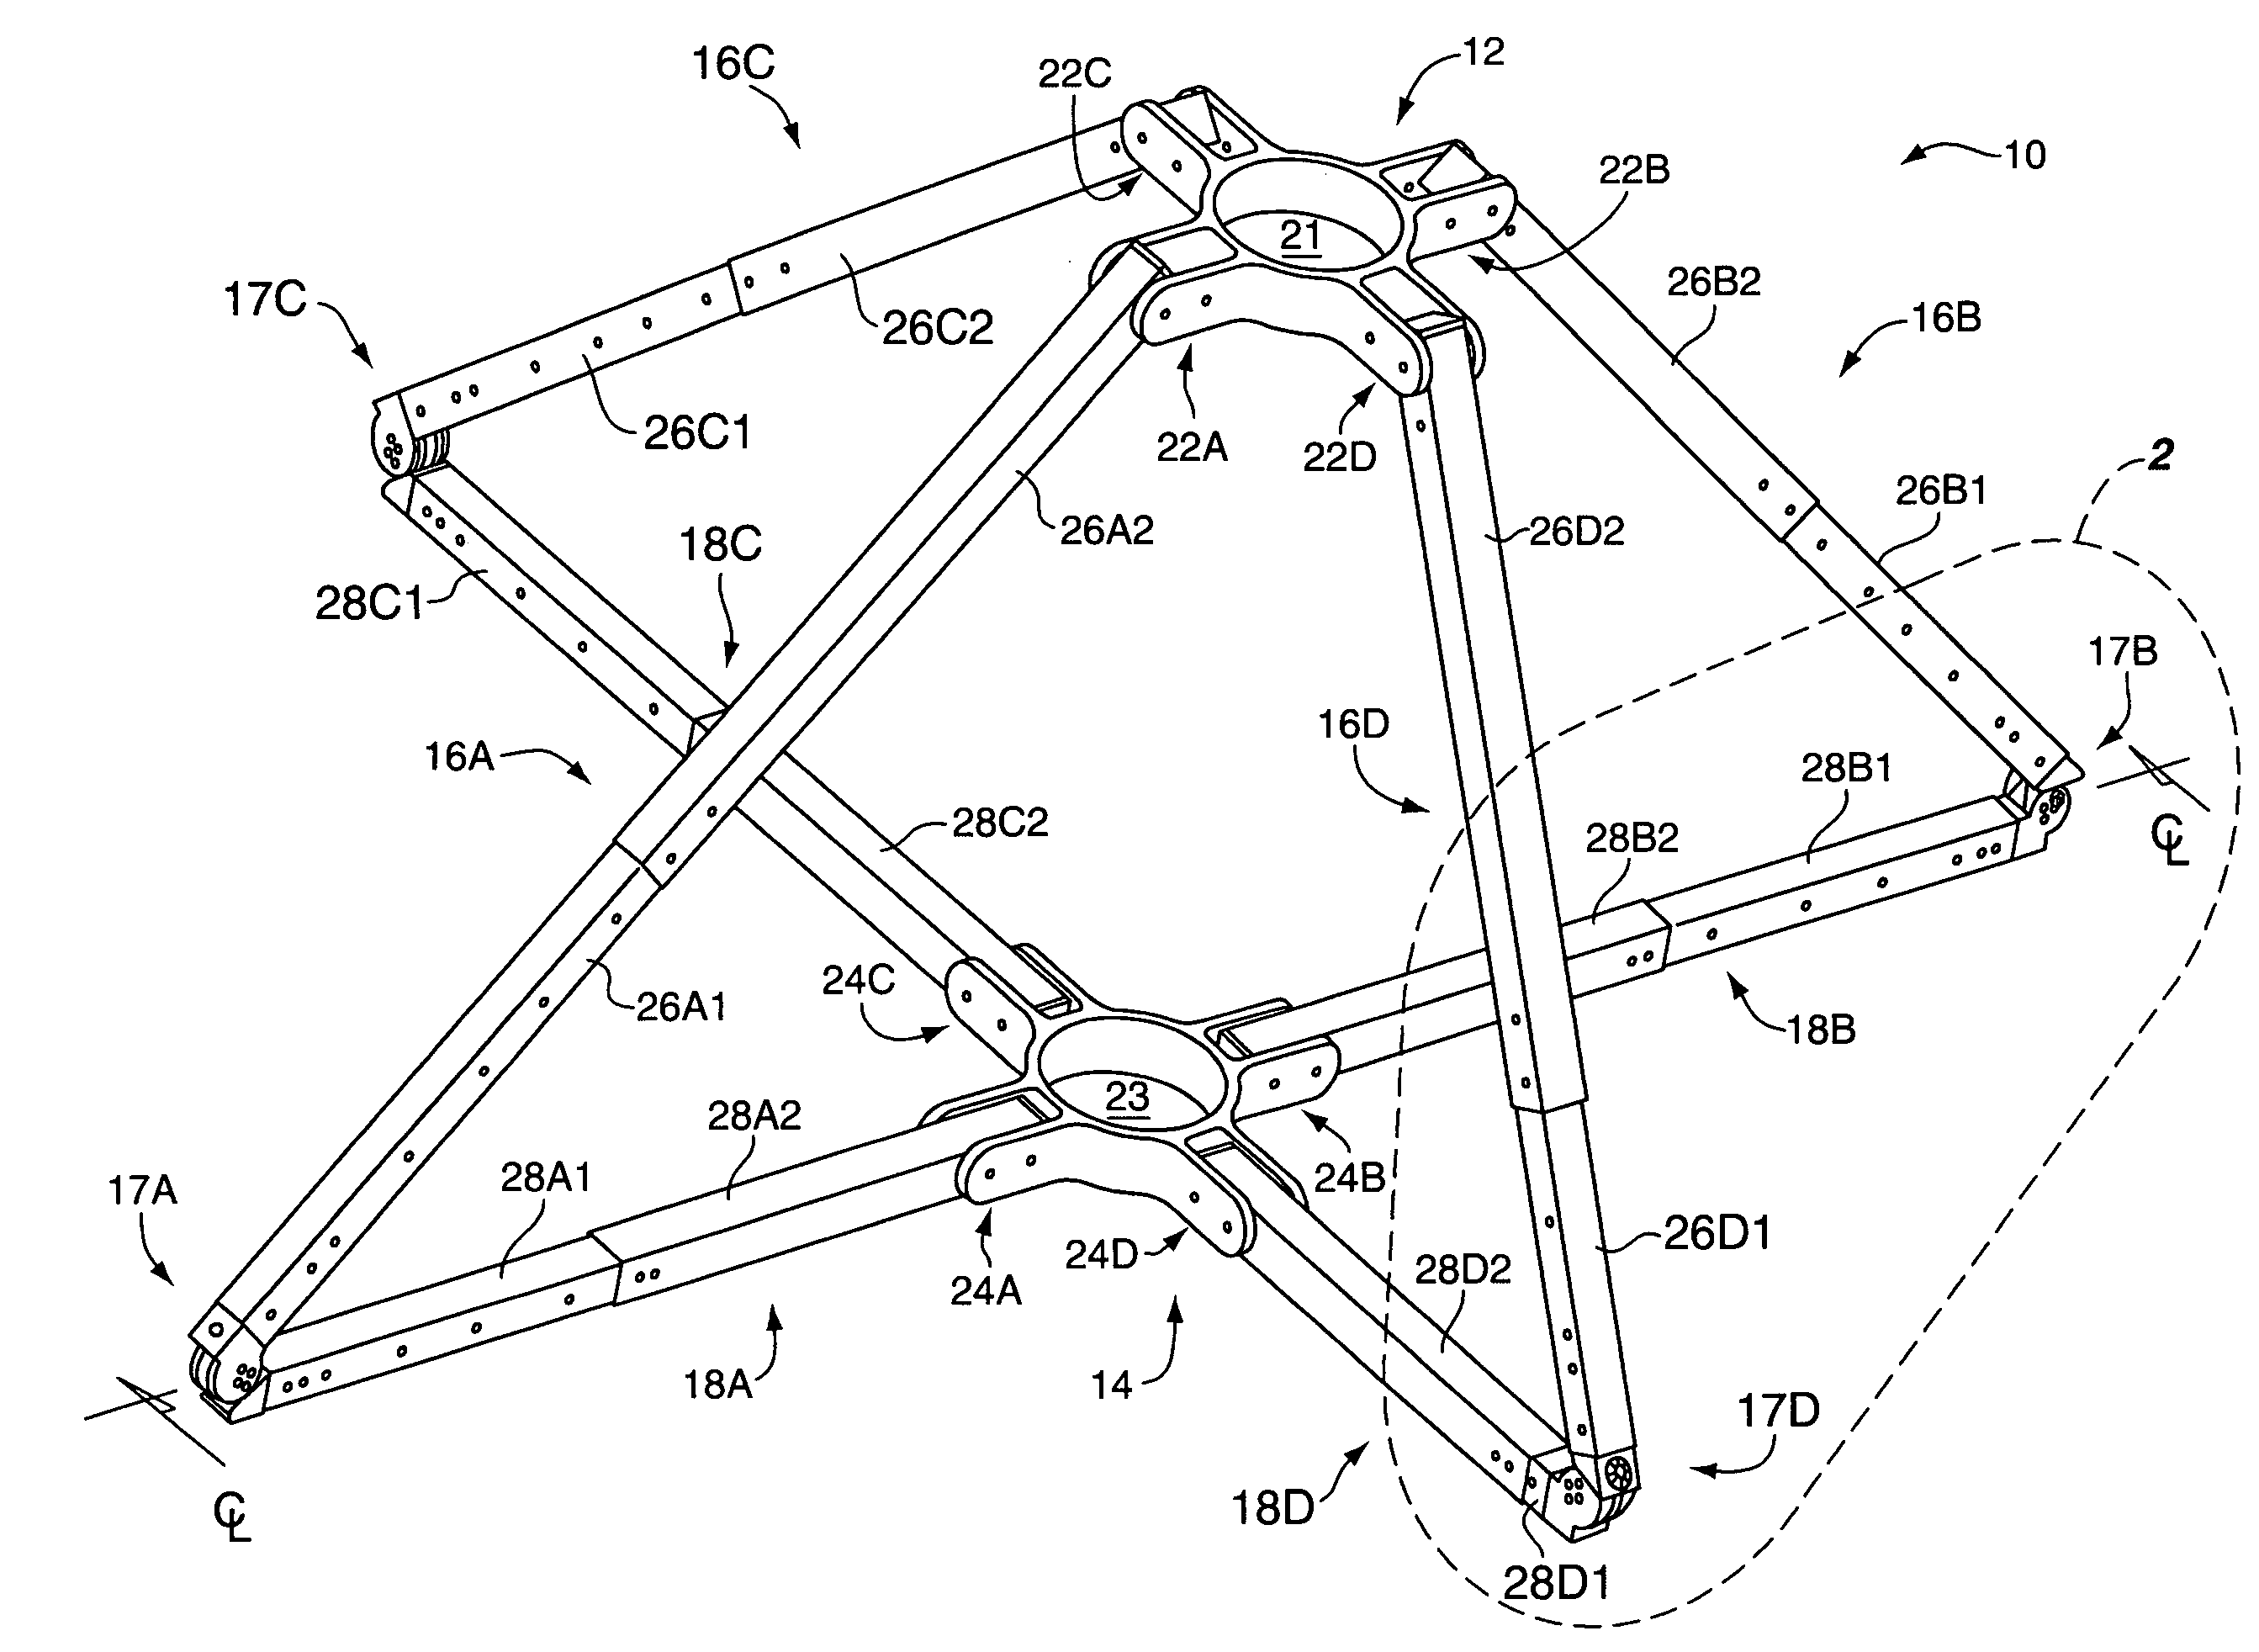 Multi-purpose upright support stand with leg assemblies having hinge-fitting